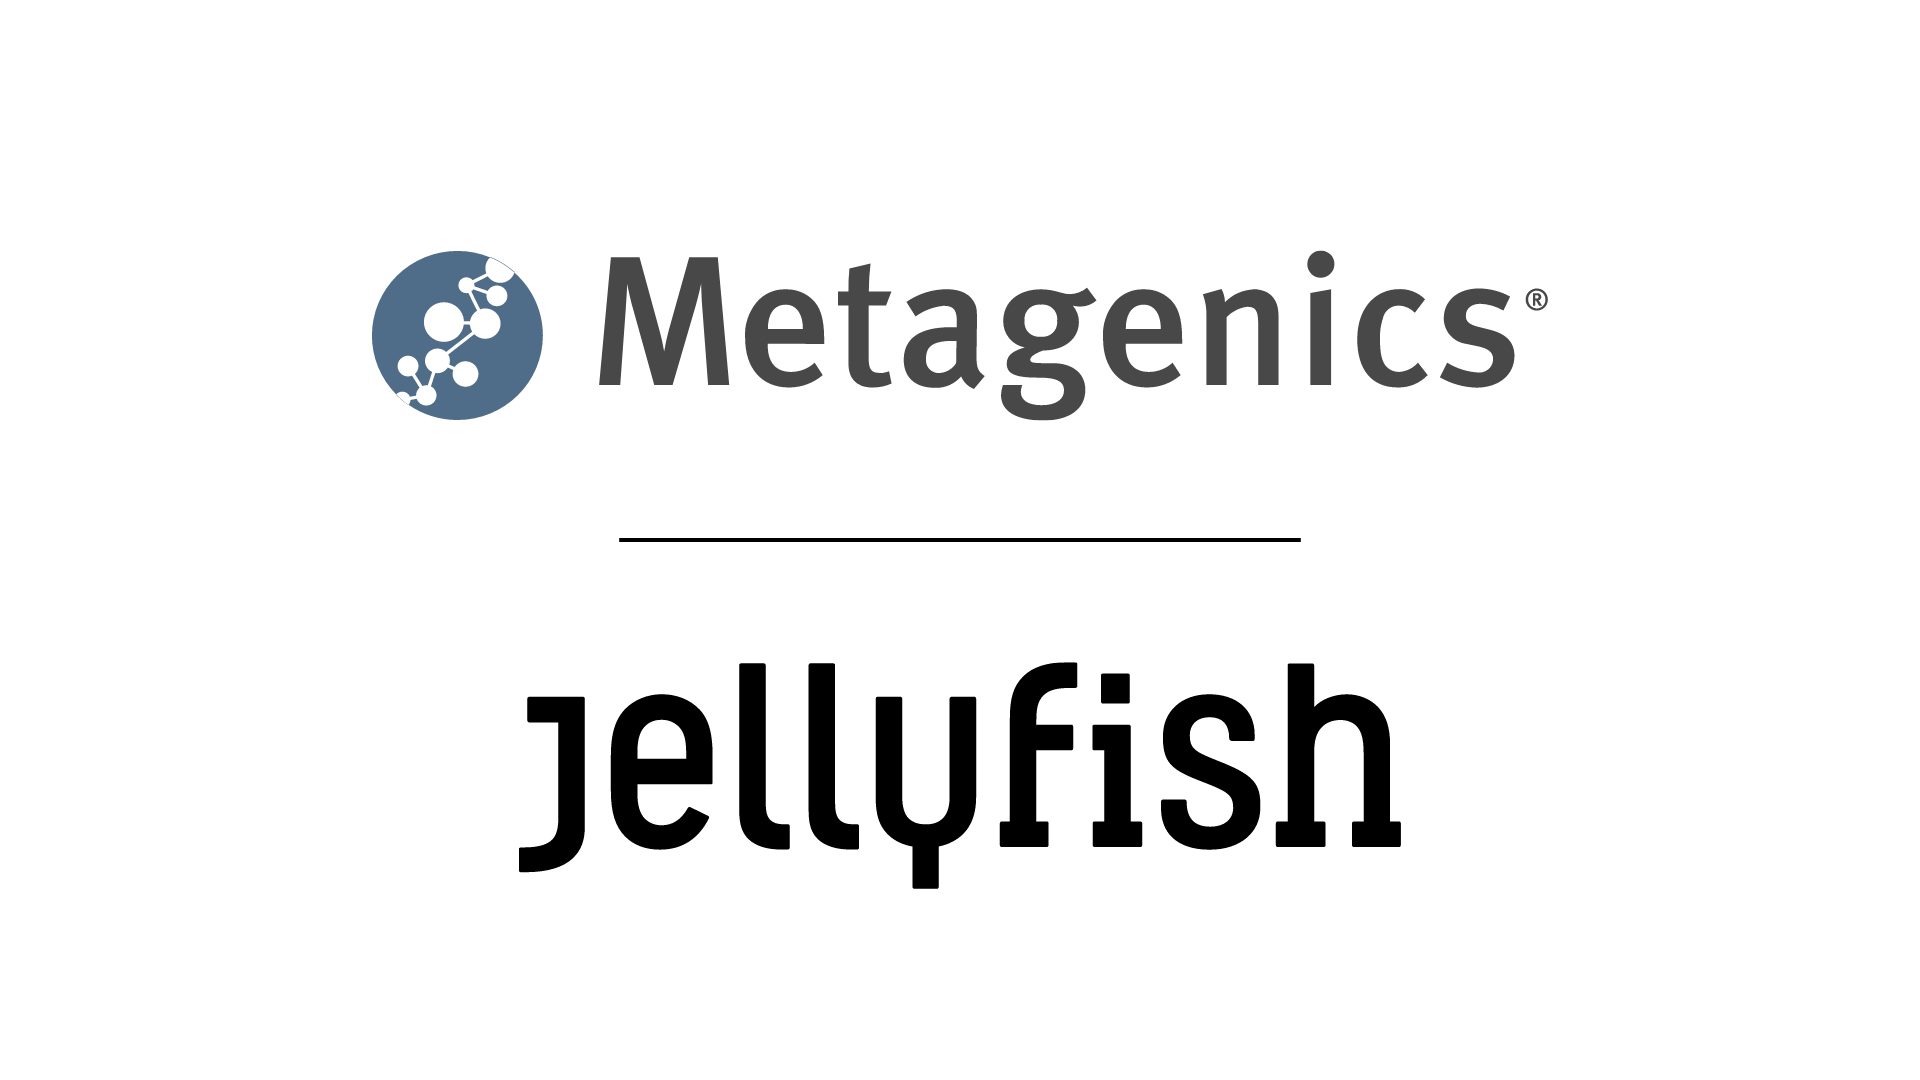 Metagenics selects Jellyfish to lead Global Media driving Brand Growth and Market Expansion